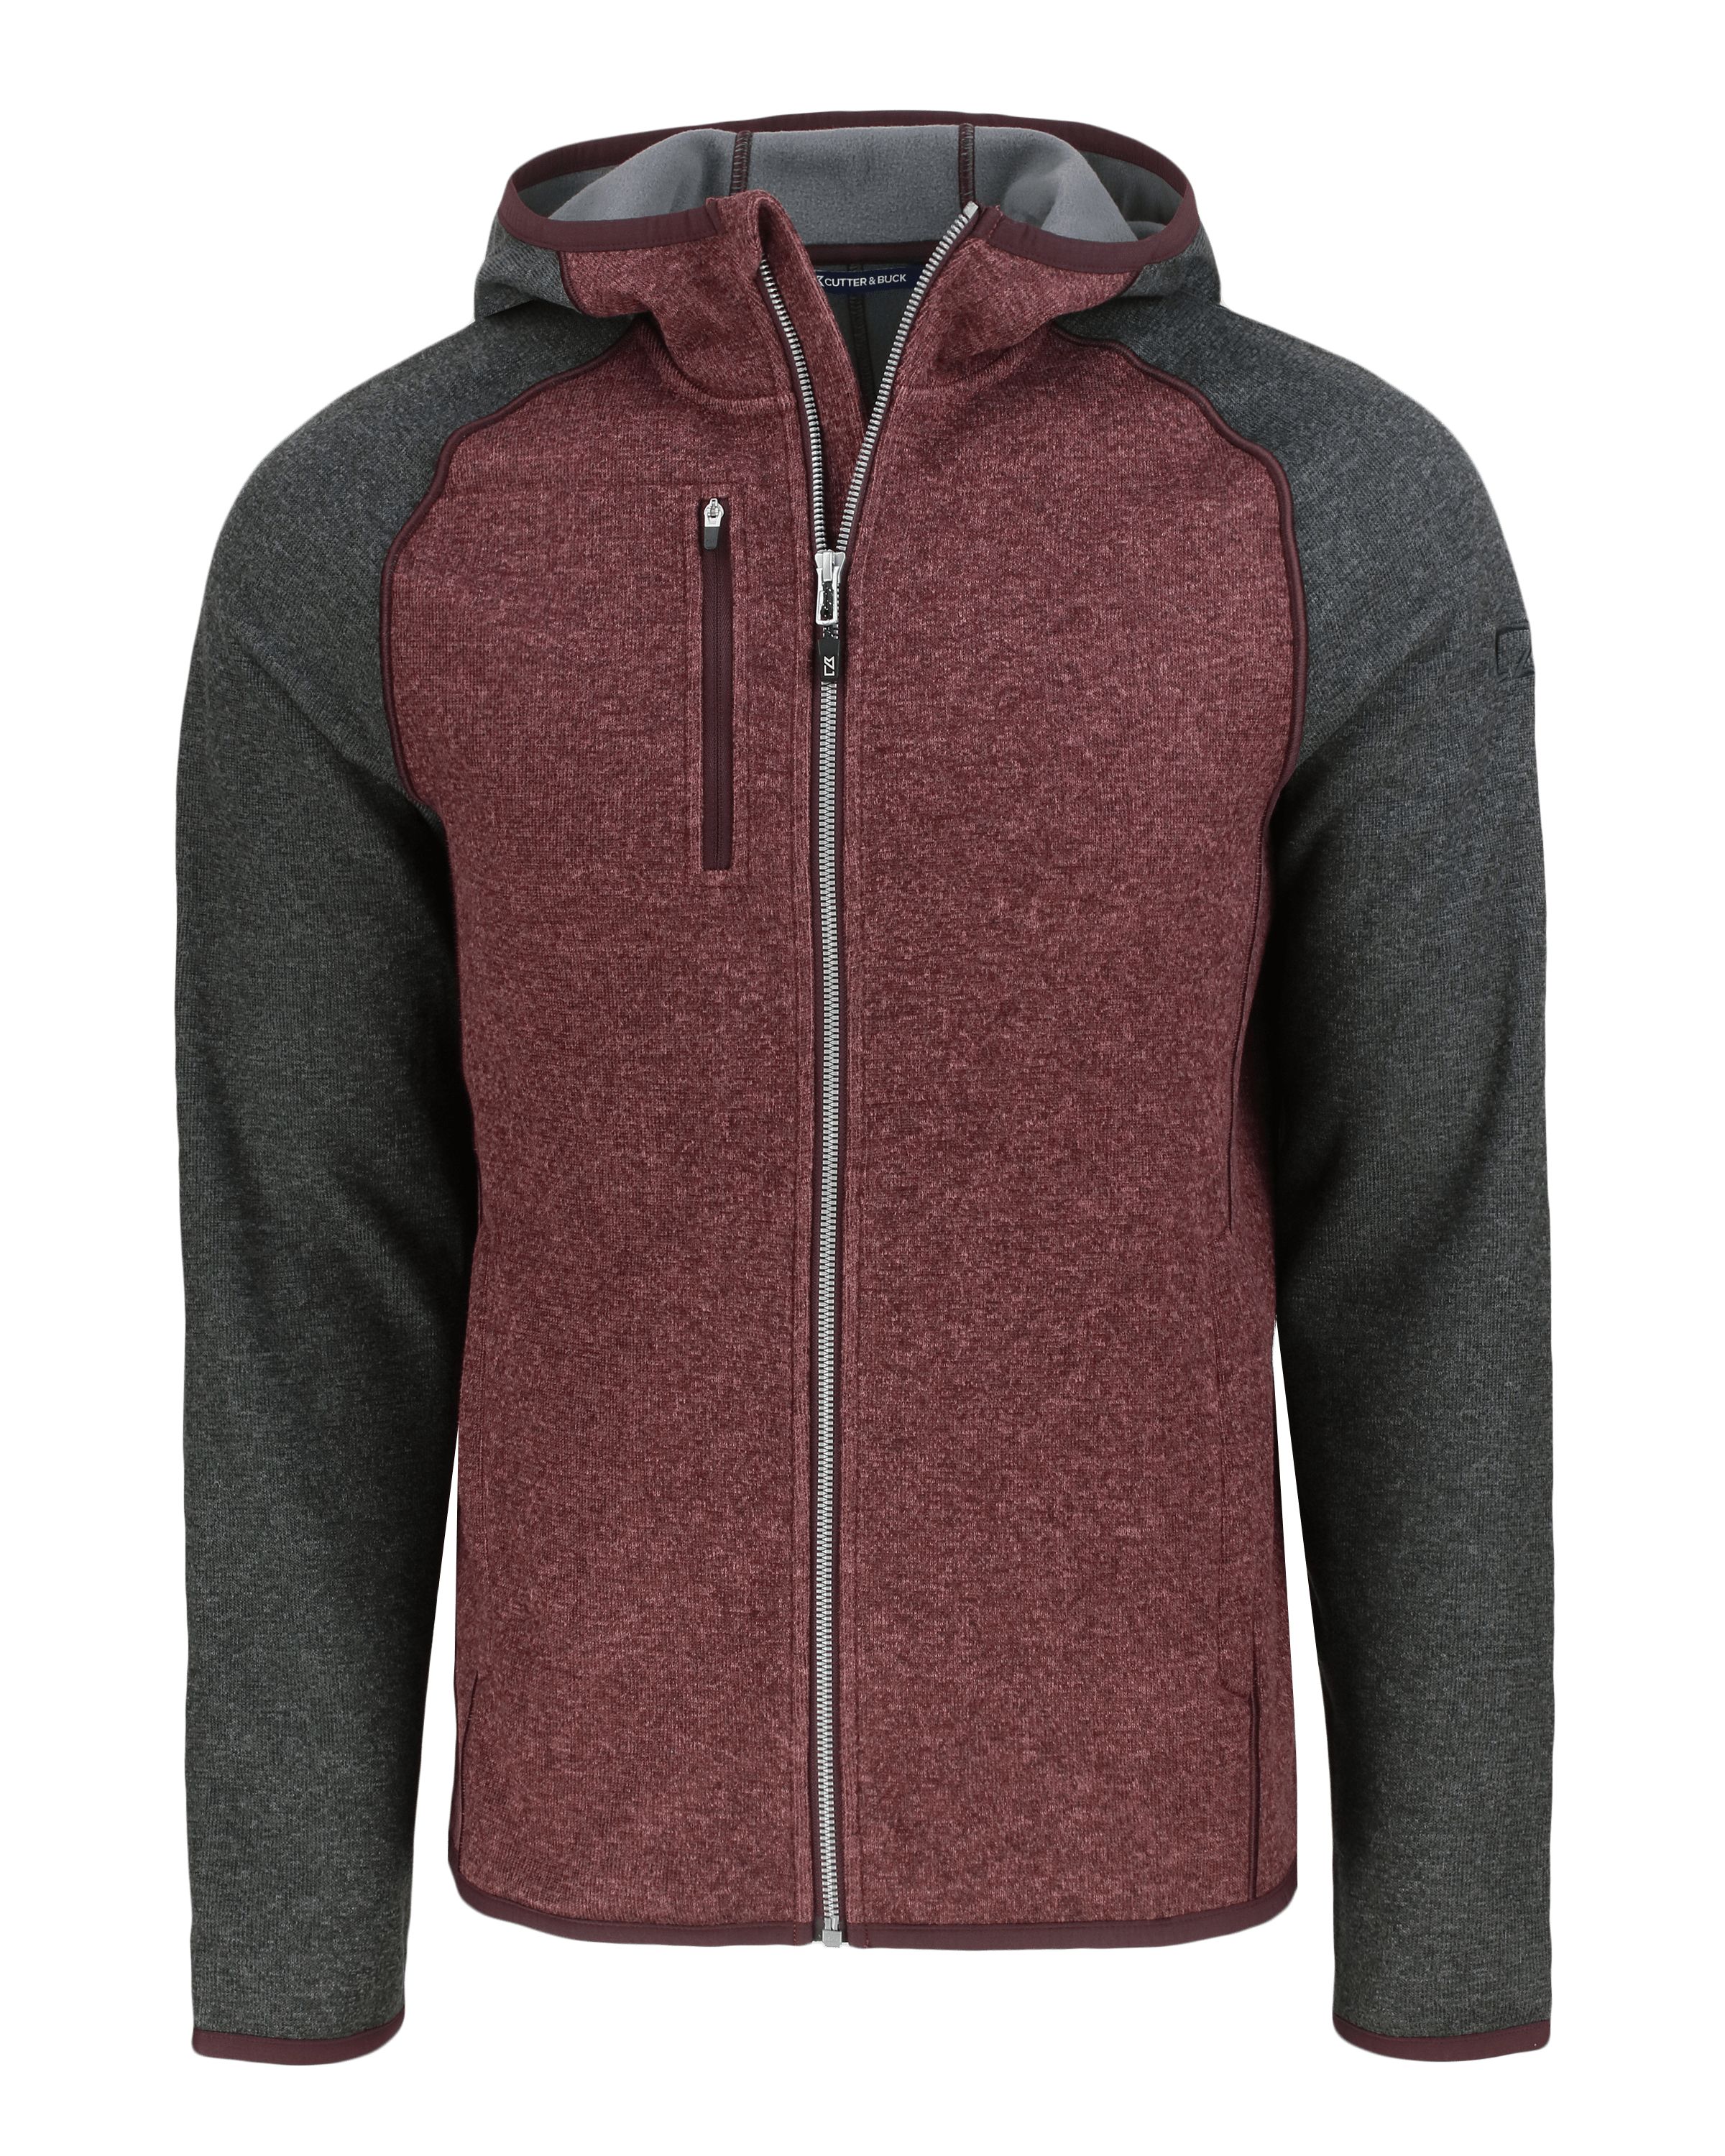 click to view Bordeaux Heather/Charcoal Heather(BHCH)